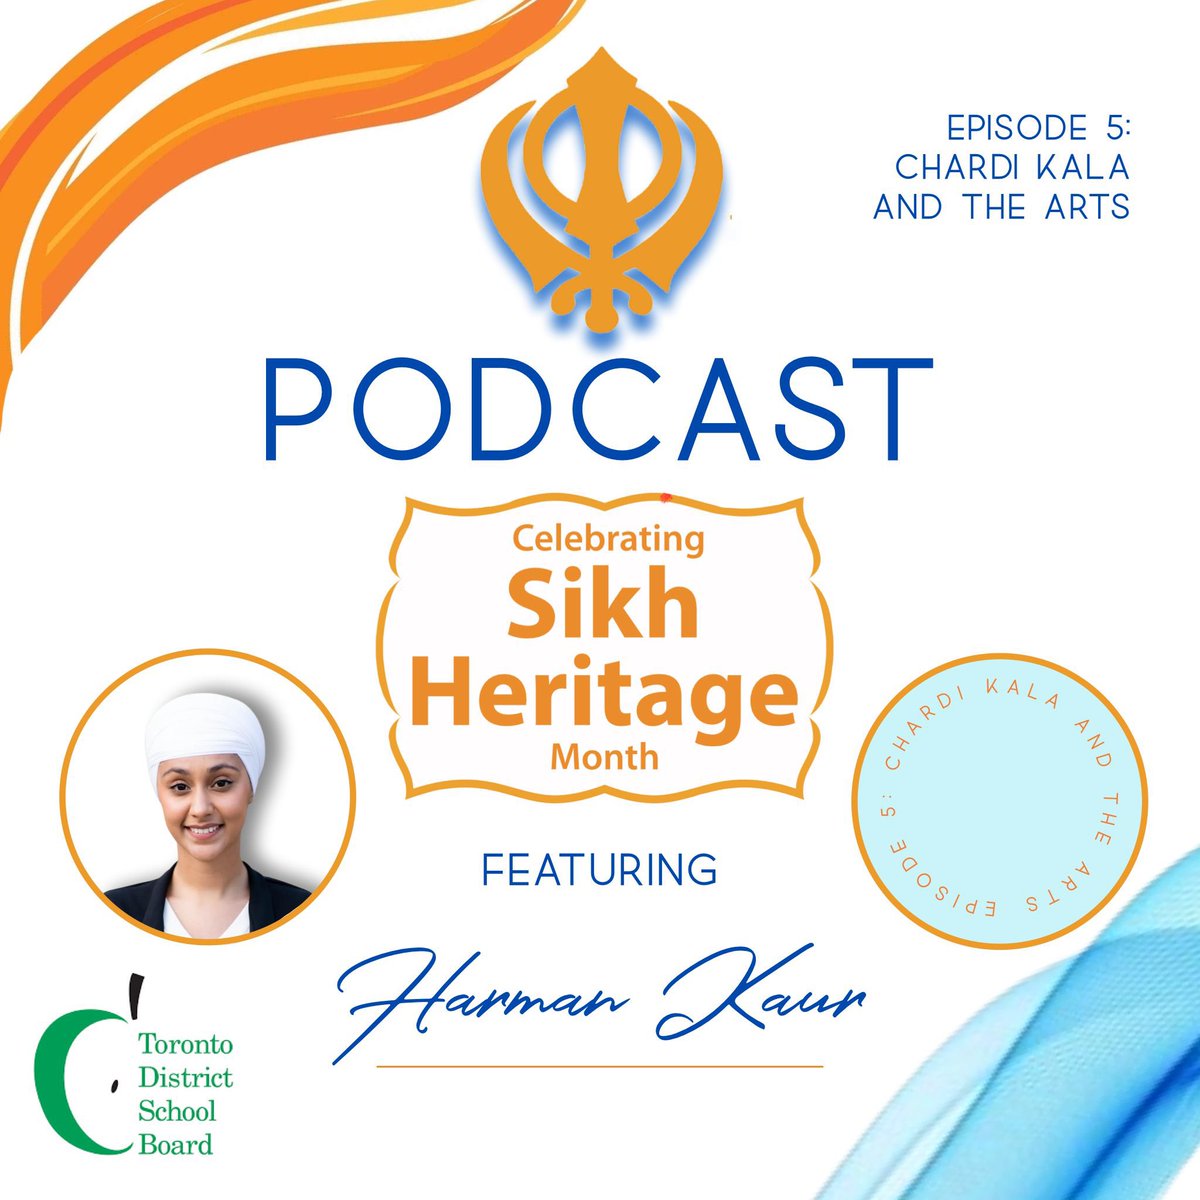 Episode 5of the Sikh Heritage Month Podcast is about Chardi Kala in the Arts, featuring guest Harman Kaur, author of the poetry book, “Phulkari” Transcripts & Educator Resources can be found in the show notes. Apple: podcasts.apple.com/ca/podcast/the… Spotify: open.spotify.com/episode/7y5U7h…